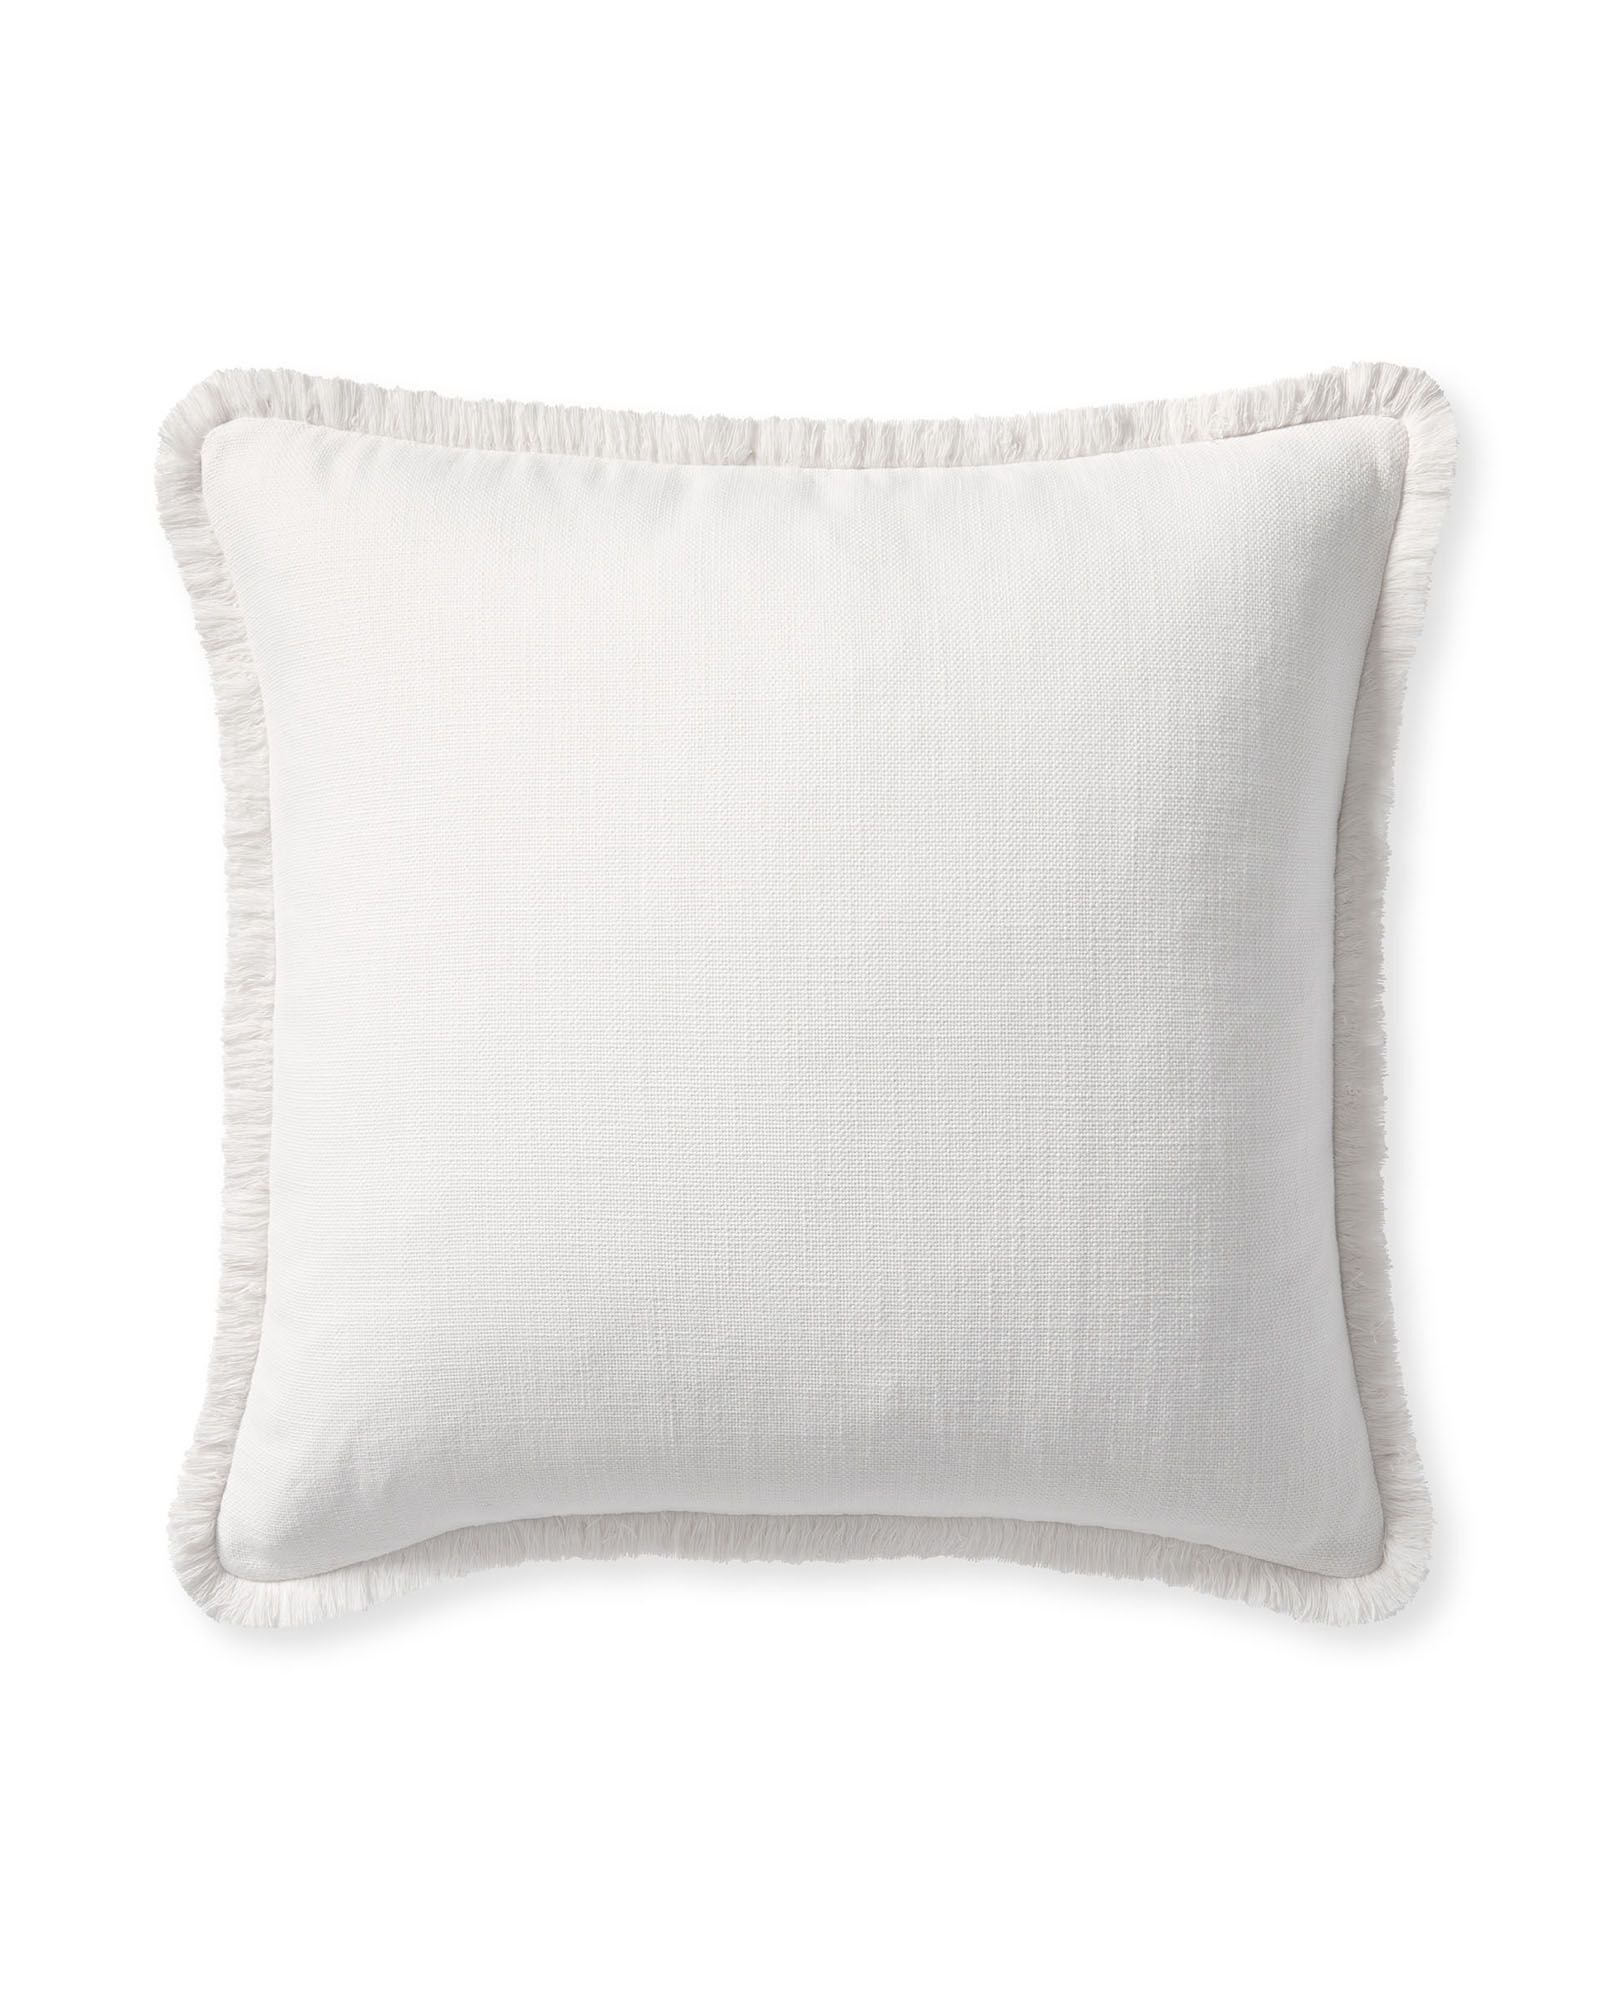 Perennials Ridgewater Pillow Cover | Serena and Lily